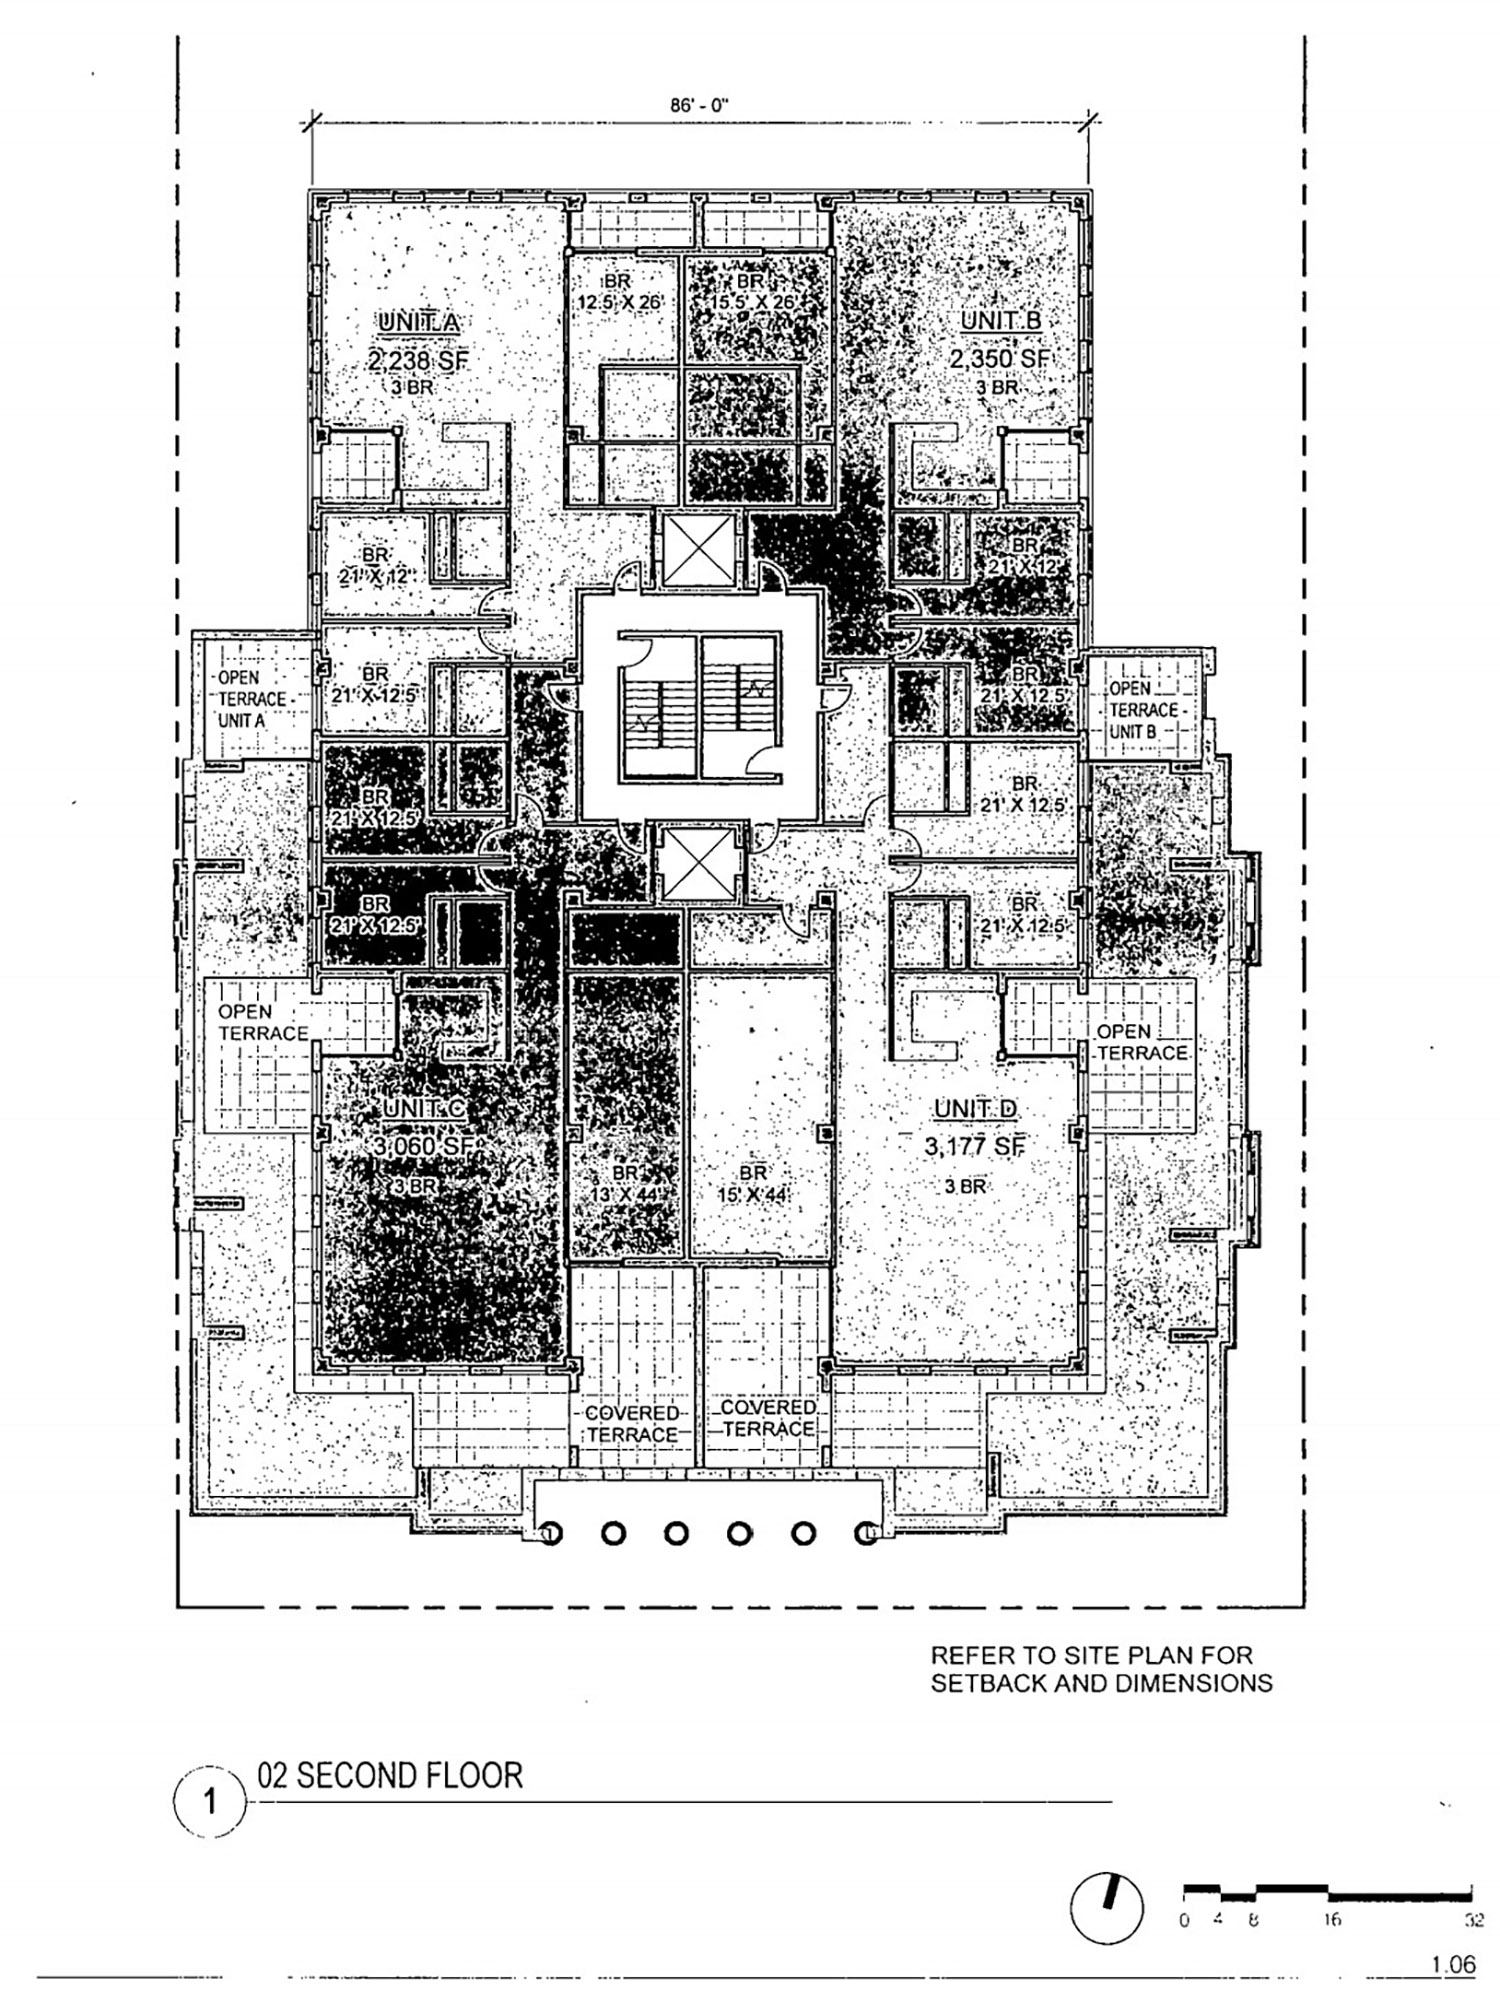 Second Floor Plan for 2700 N Pine Grove Avenue. Drawing by Booth Hansen